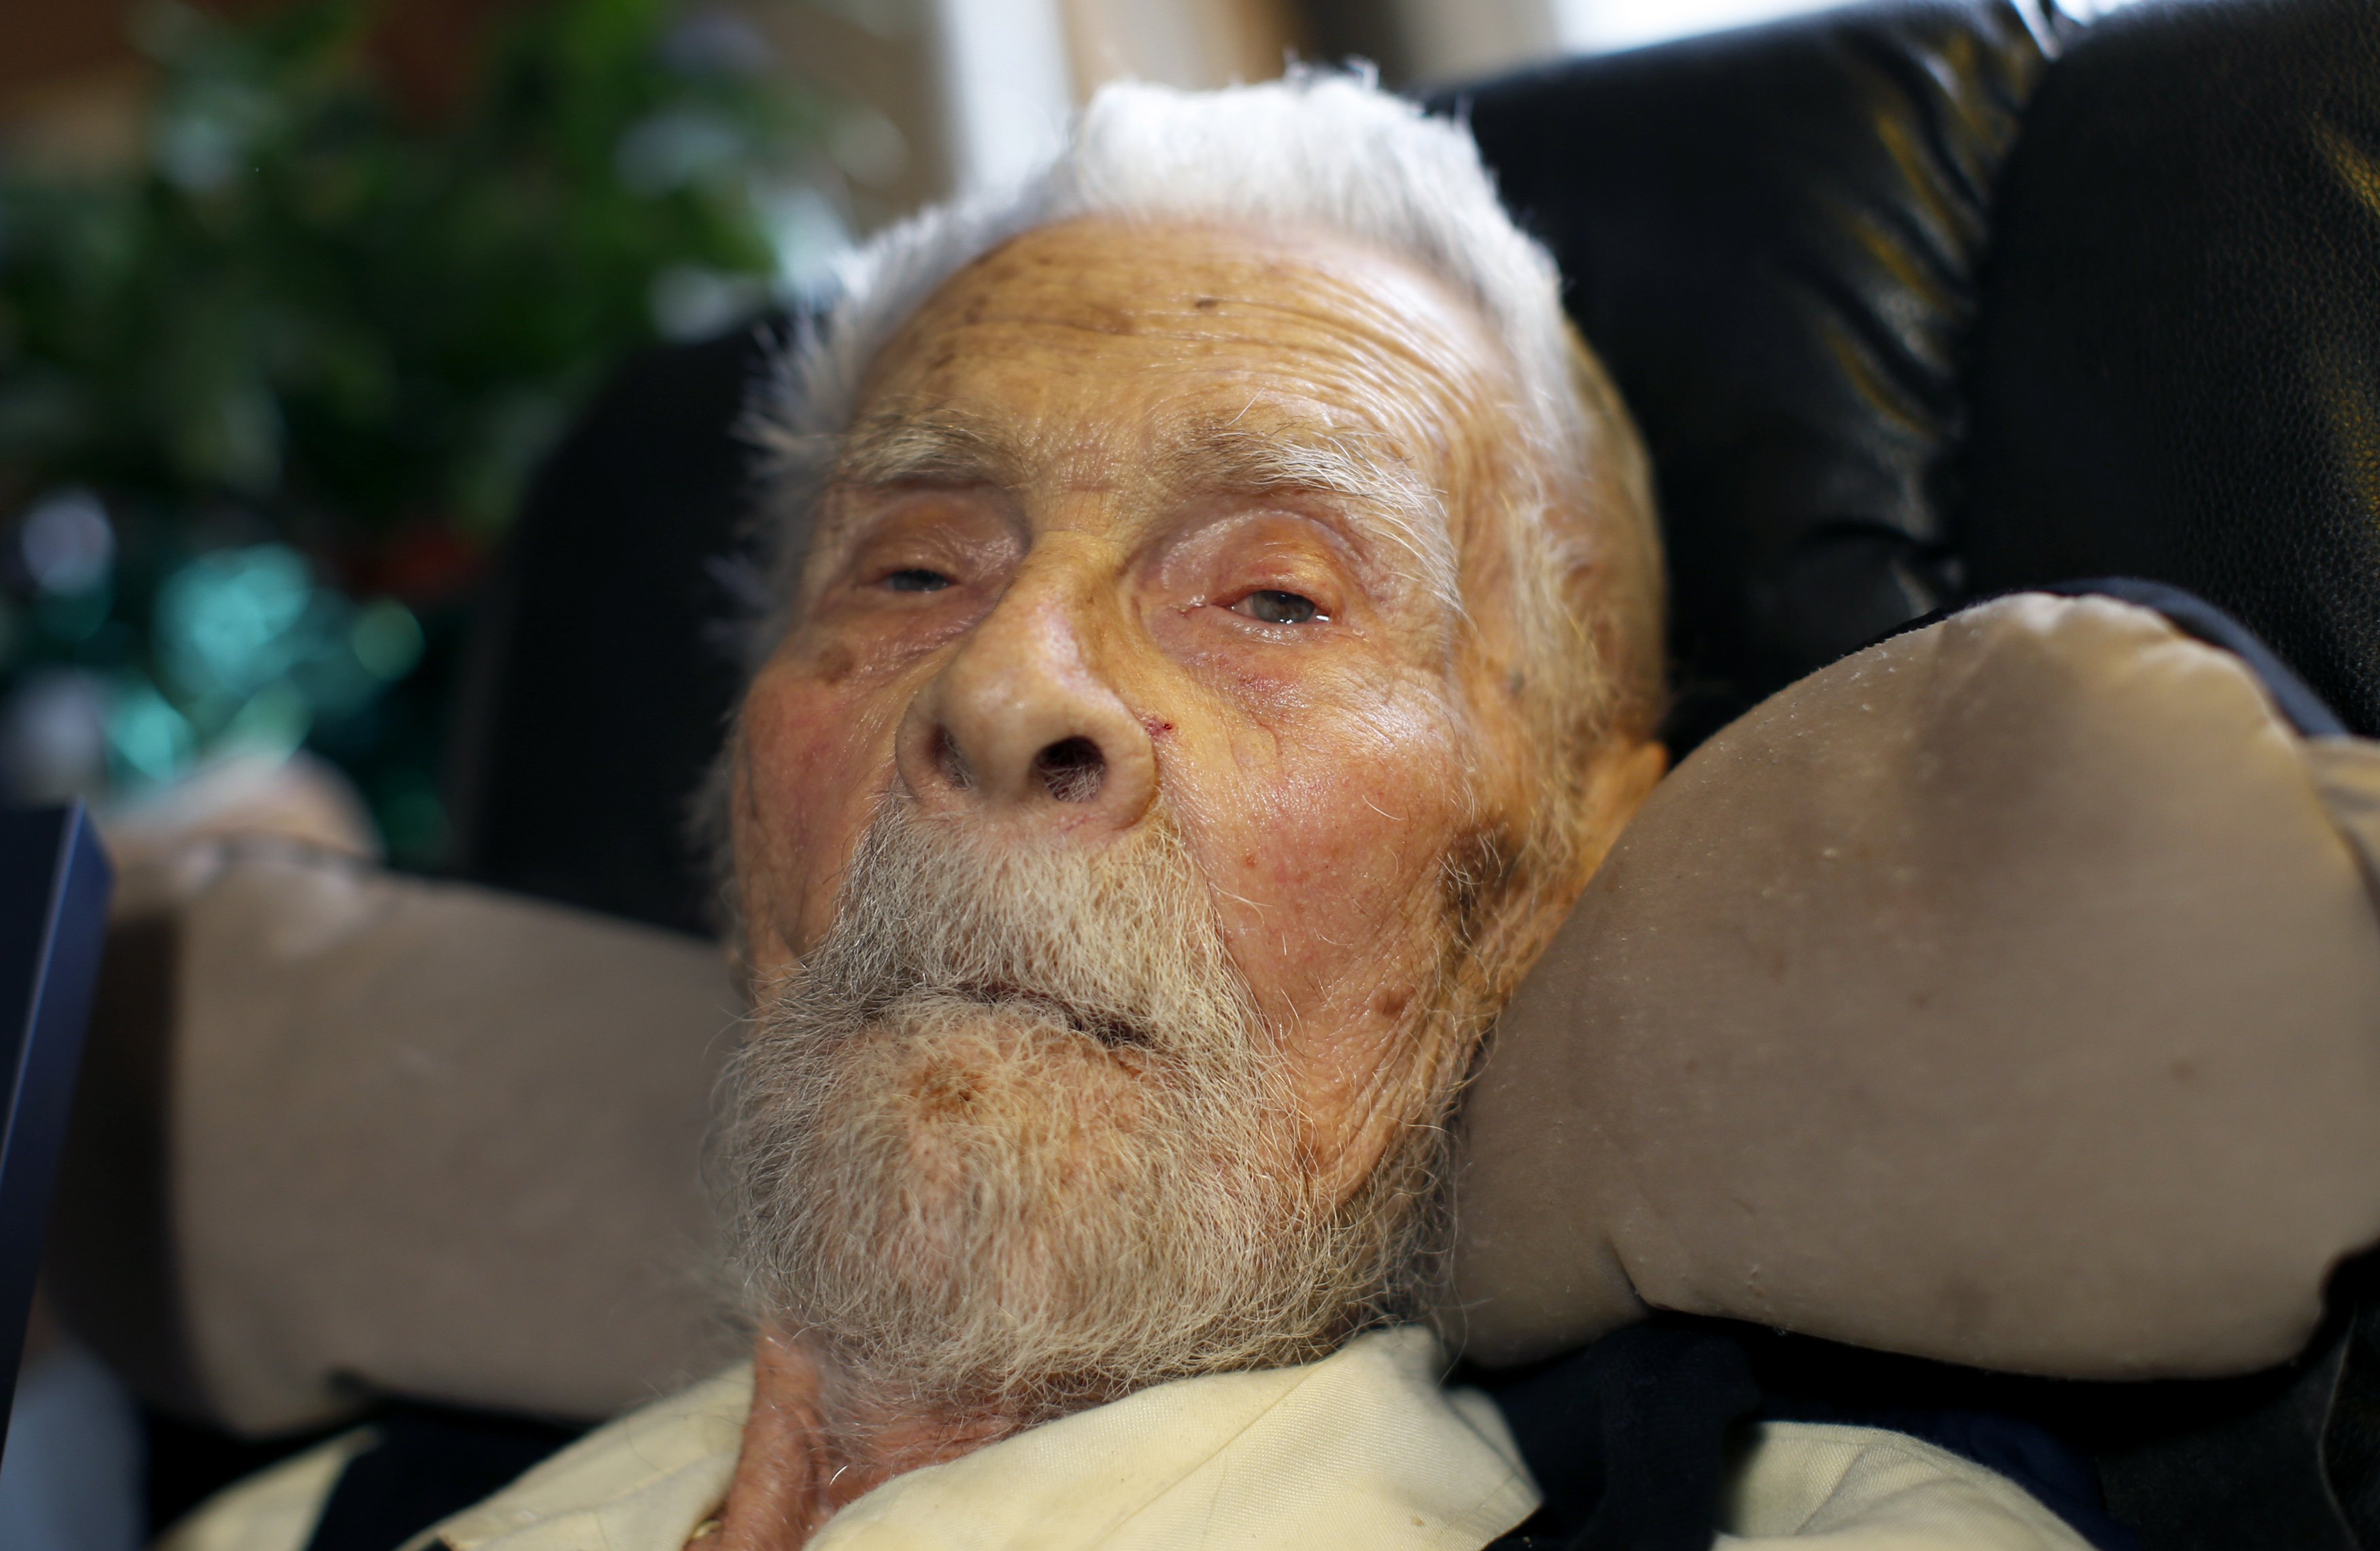 Alexander Imich, world's oldest man, dies in NYC at age 111 CBS News